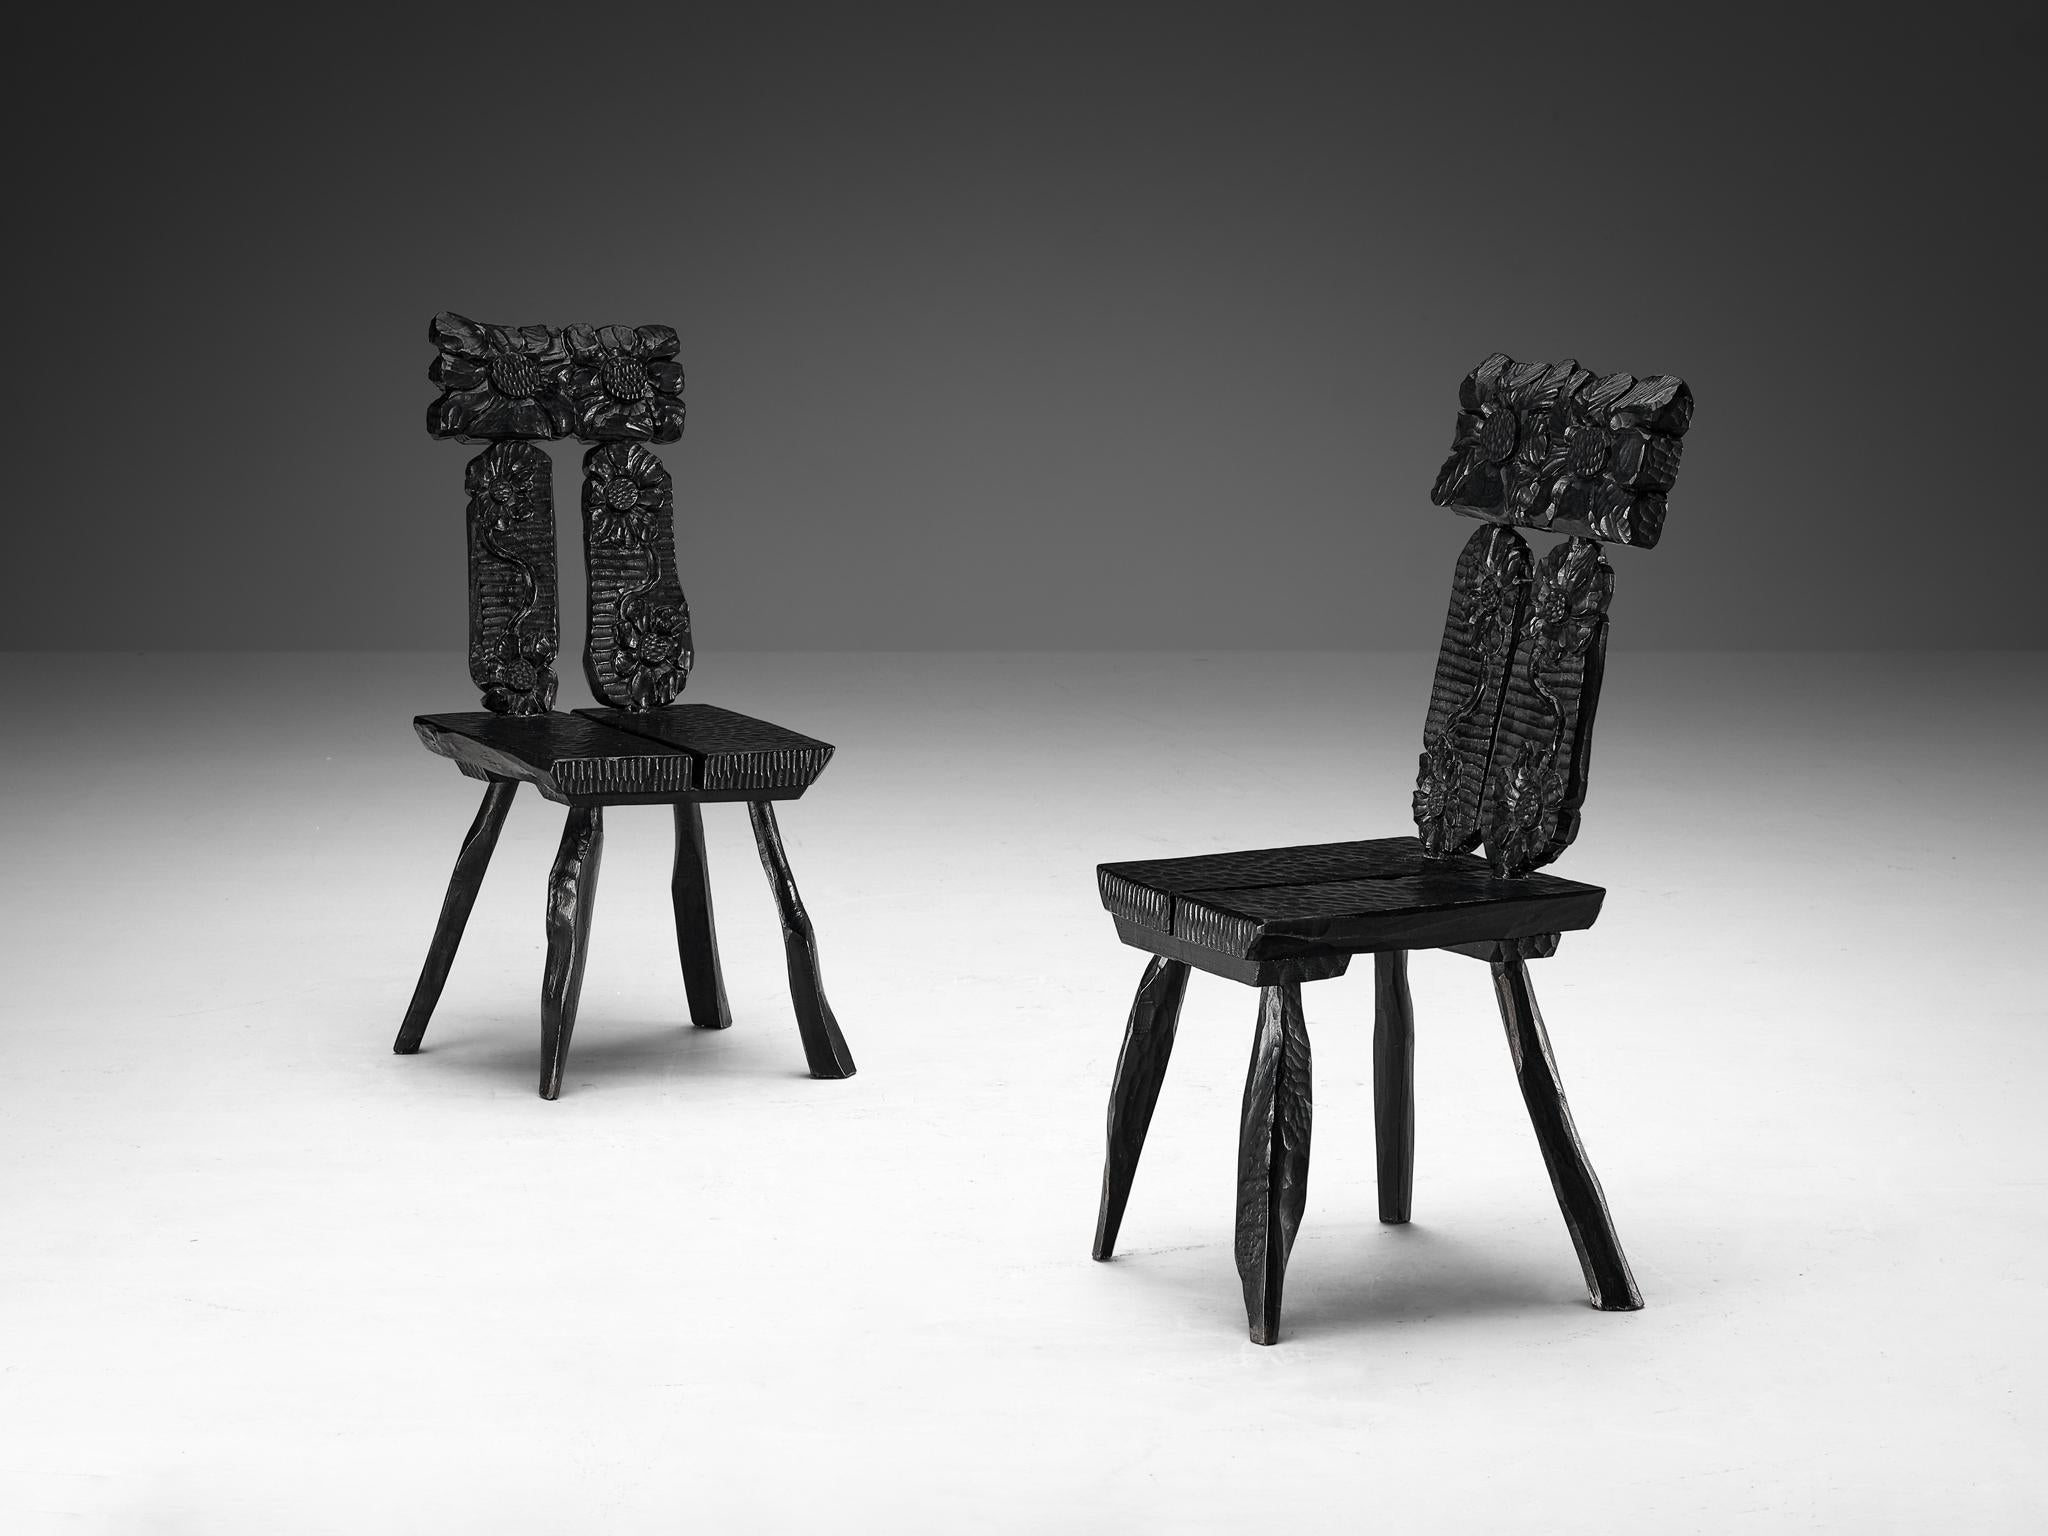 Dining chairs, lacquered wood, France, 1970s

Crafted with unparalleled artistry, these dining chairs epitomize exquisite craftsmanship with meticulously carved details that draw inspiration from nature. These chairs exude an enchanting charm